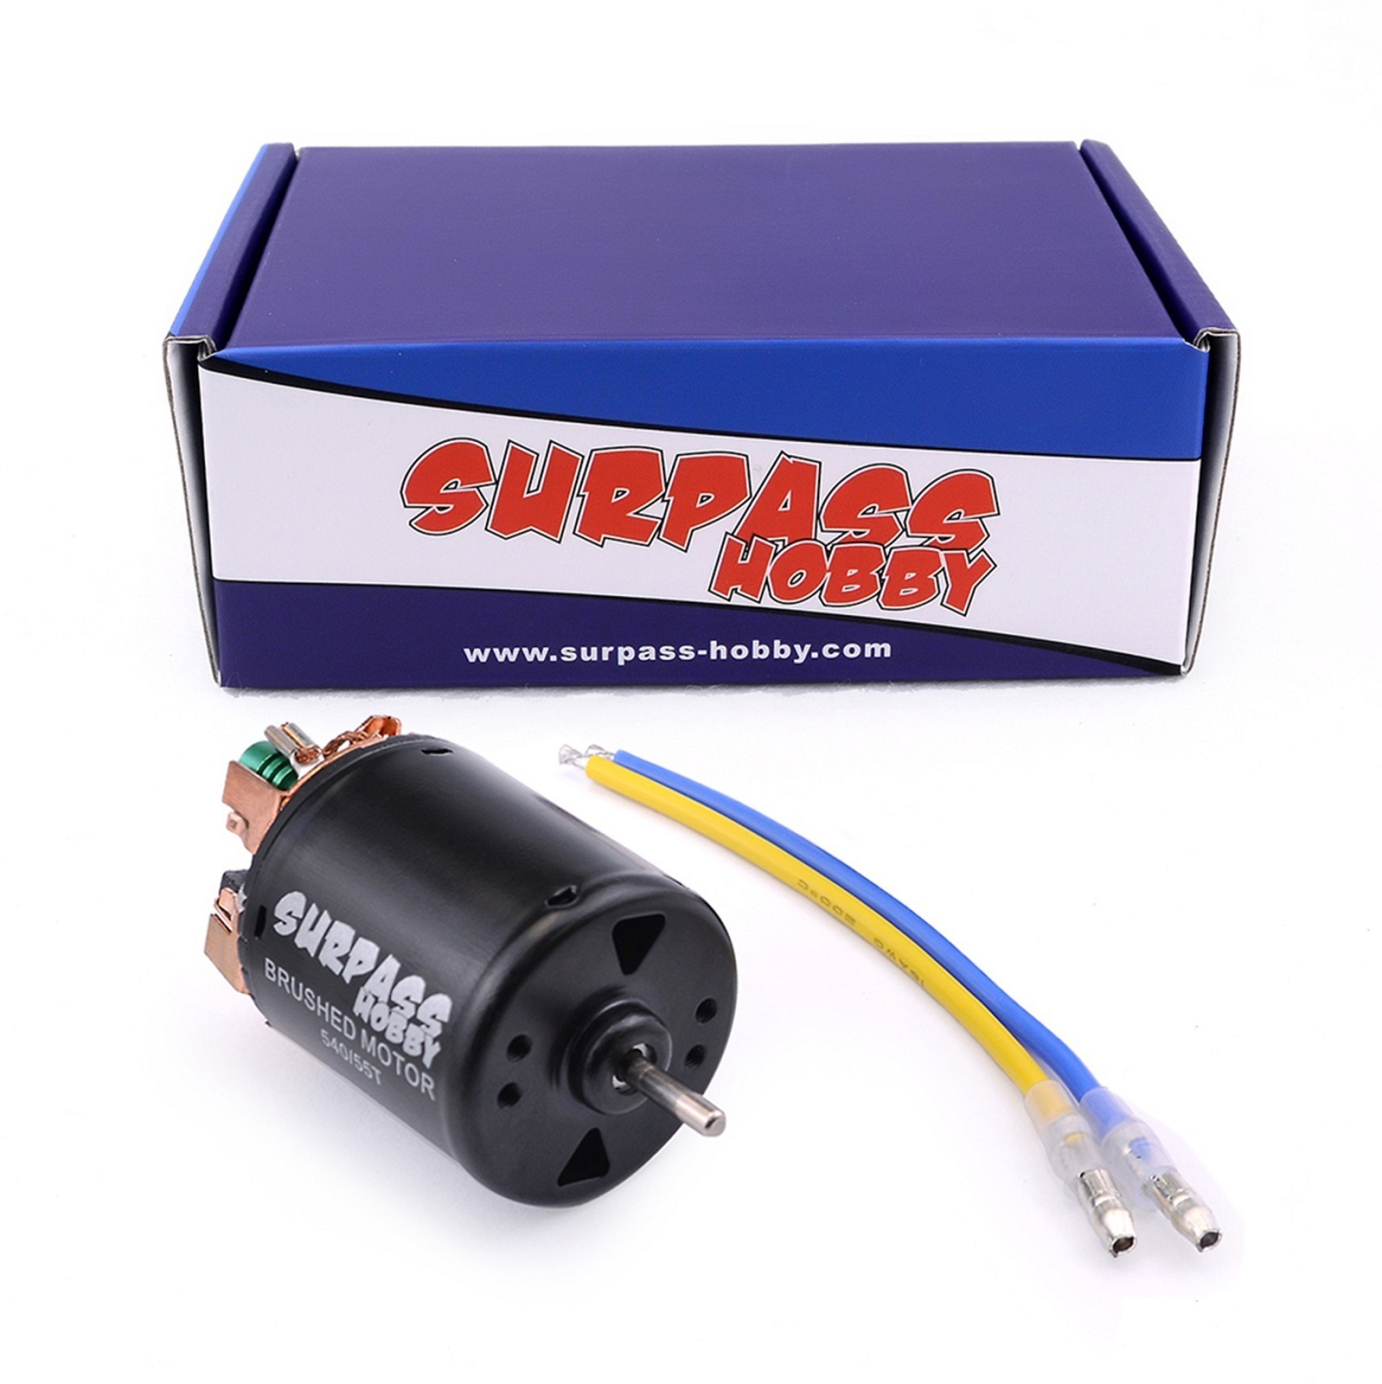 Surpass Hobby 540 brushed motor 3-slot 23T RPM: 19000 IO: 1.7A ?